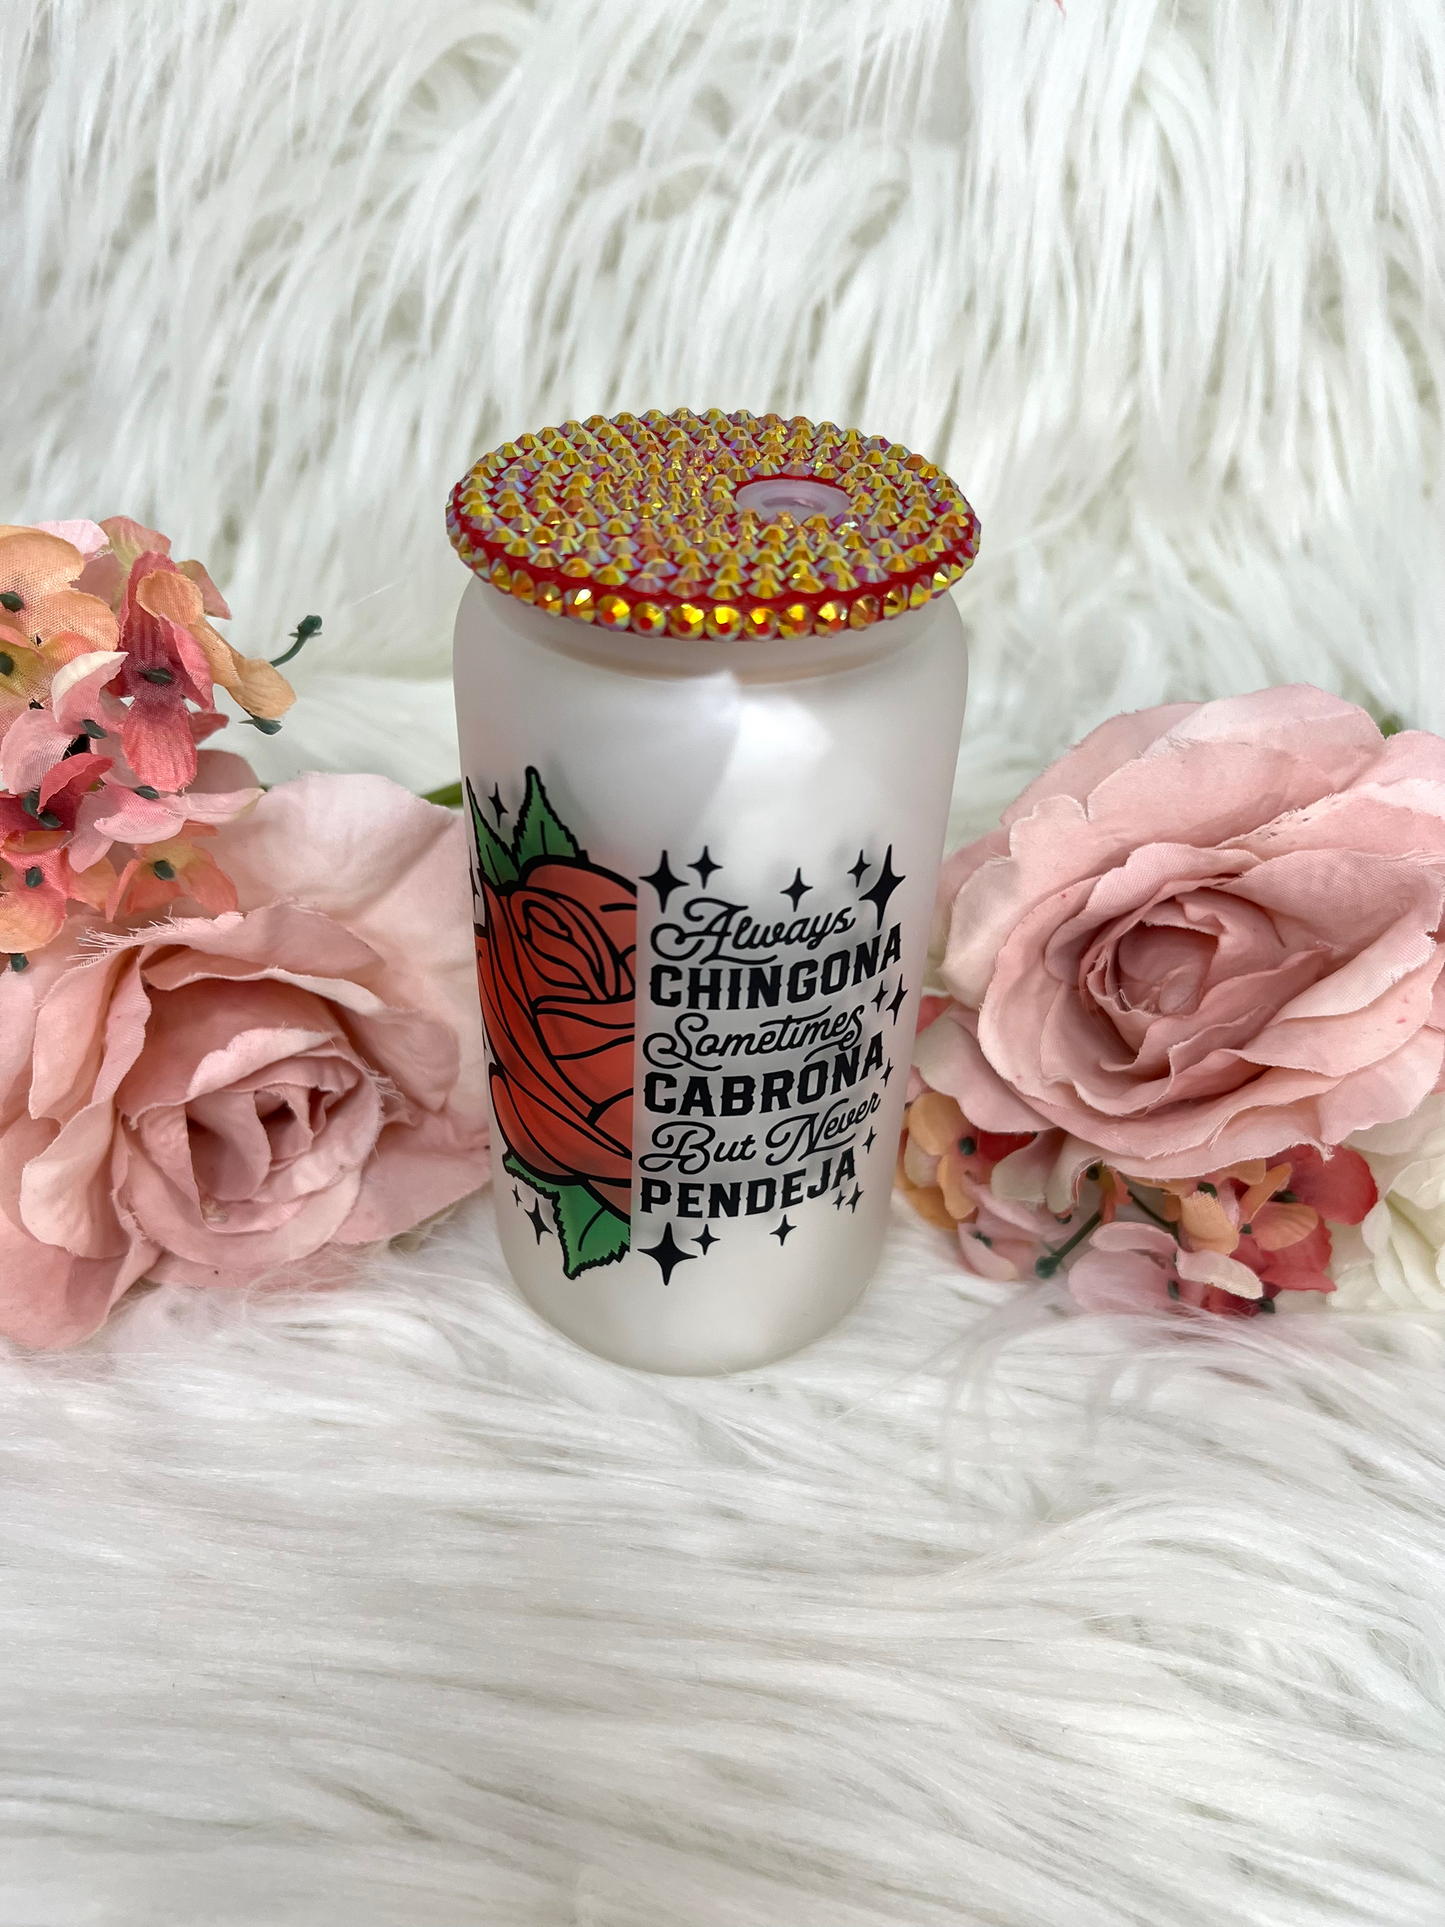 hingona 16oz frosted libbey glass can, chingona, always chingona cup, chingona cup, chingona vaso, 16oz cup, vaso de 16oz, always chingona